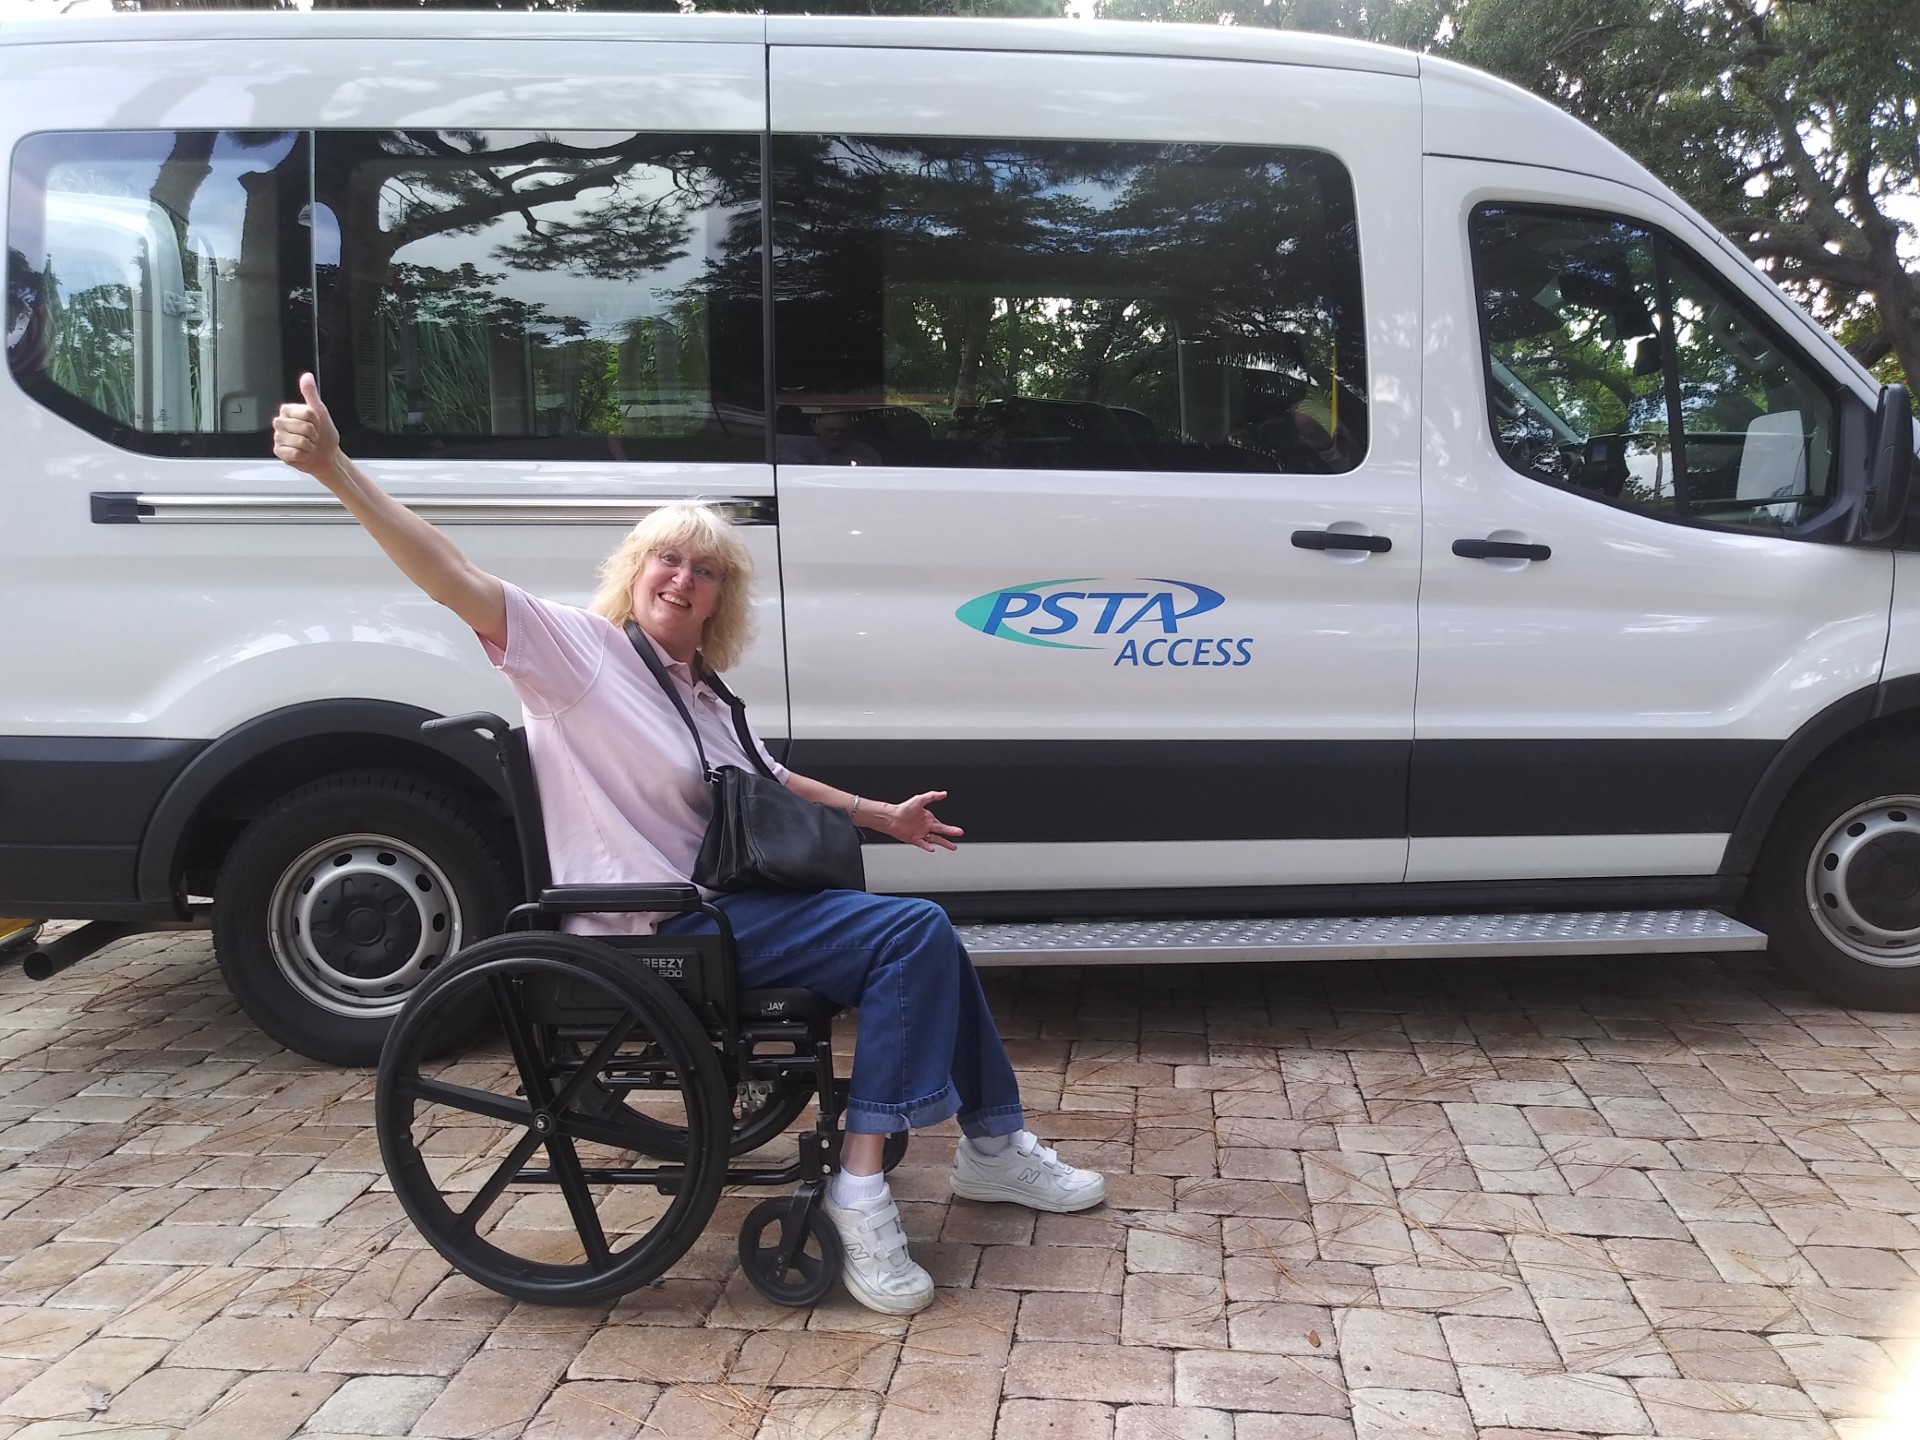 Kim Rankine, TRAC Member representing PSTA Access, in her wheelchair in front of an Access vehicle, holding her arms out and giving a thumbs up